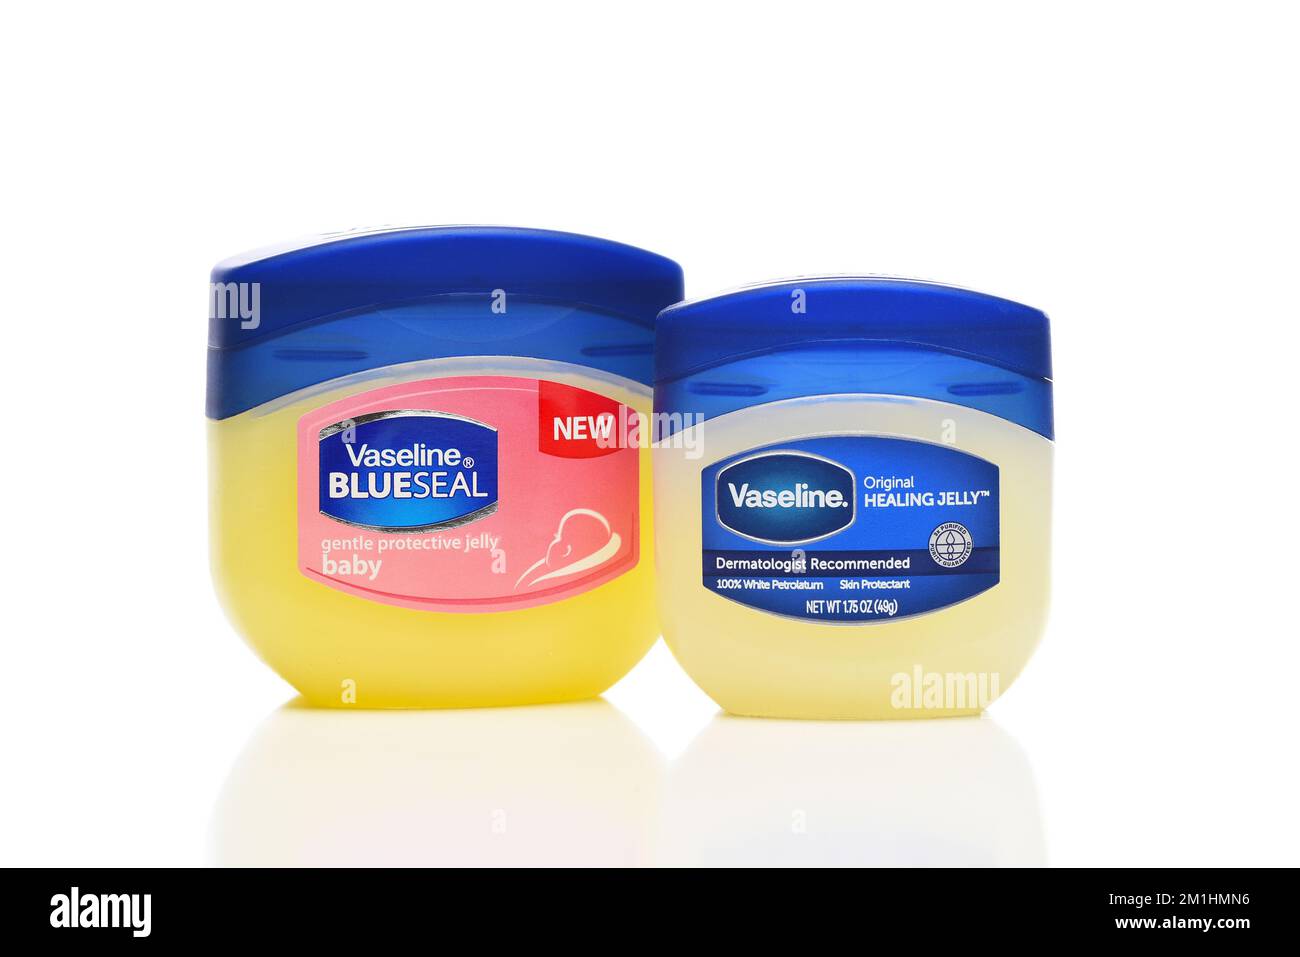 Vaseline product hi-res stock photography images - Alamy